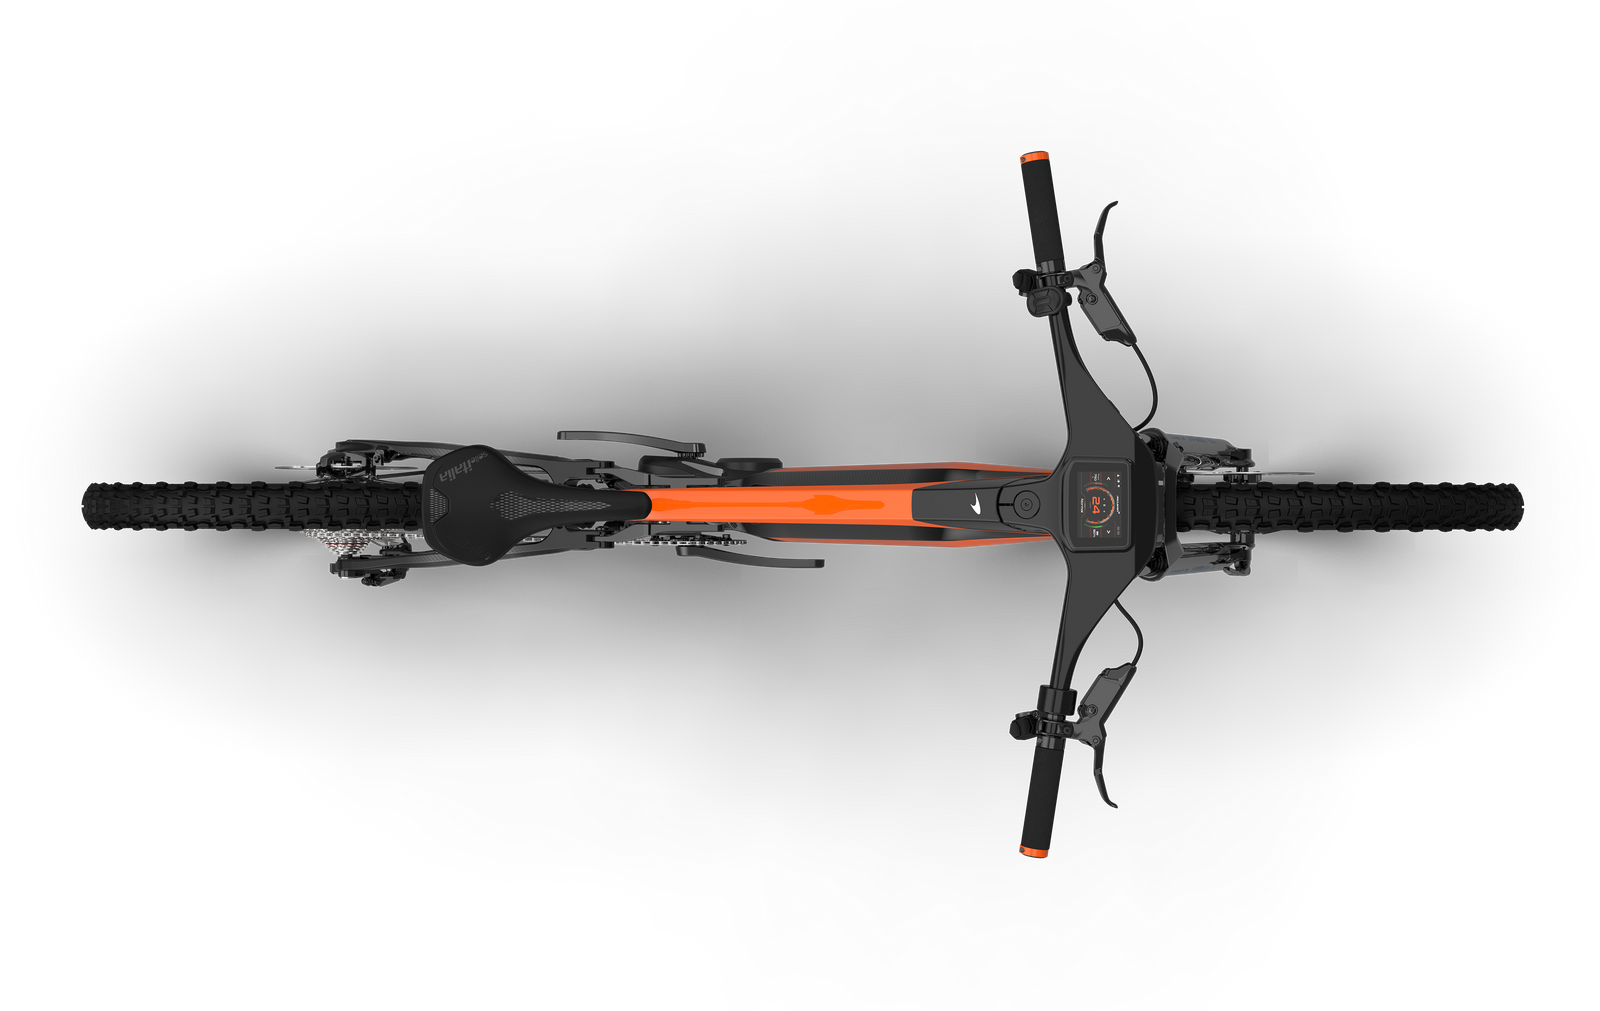 Overhead view of the McLaren Extreme 160mm front and 145rear suspension eMTB, clearly showing the usage of McLaren's core brand color of mango orange on the top tube and aluminum grip clamps.  